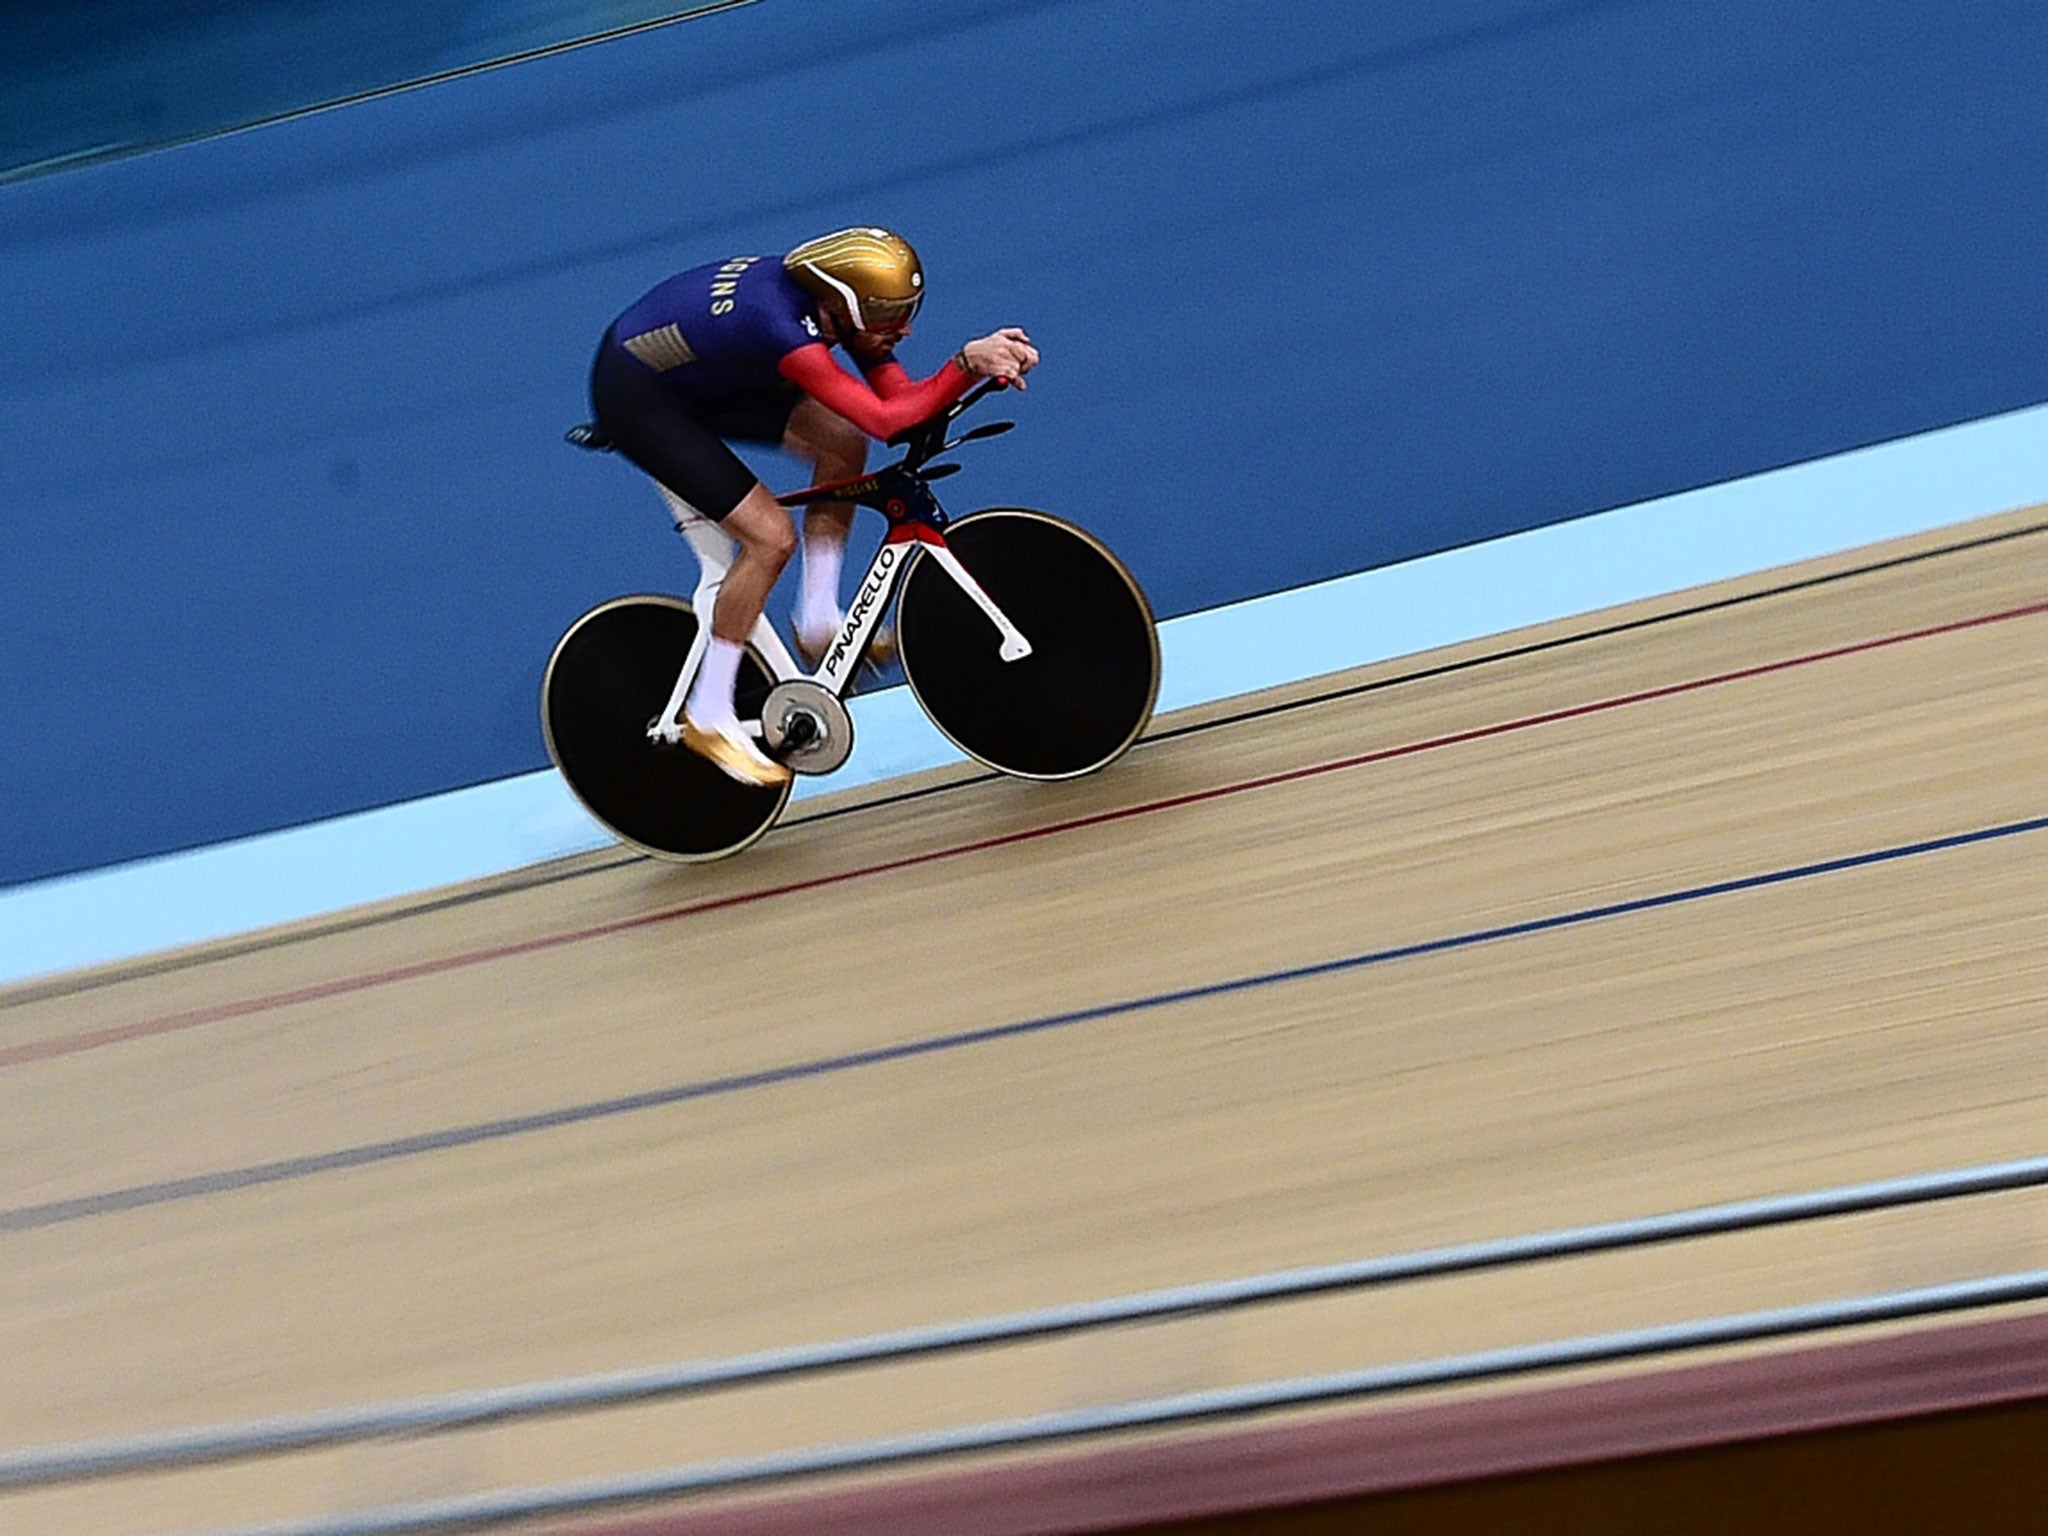 Sir Bradley Wiggins training at Lee Valley VeloPark for Sunday's attempt on the hour world record